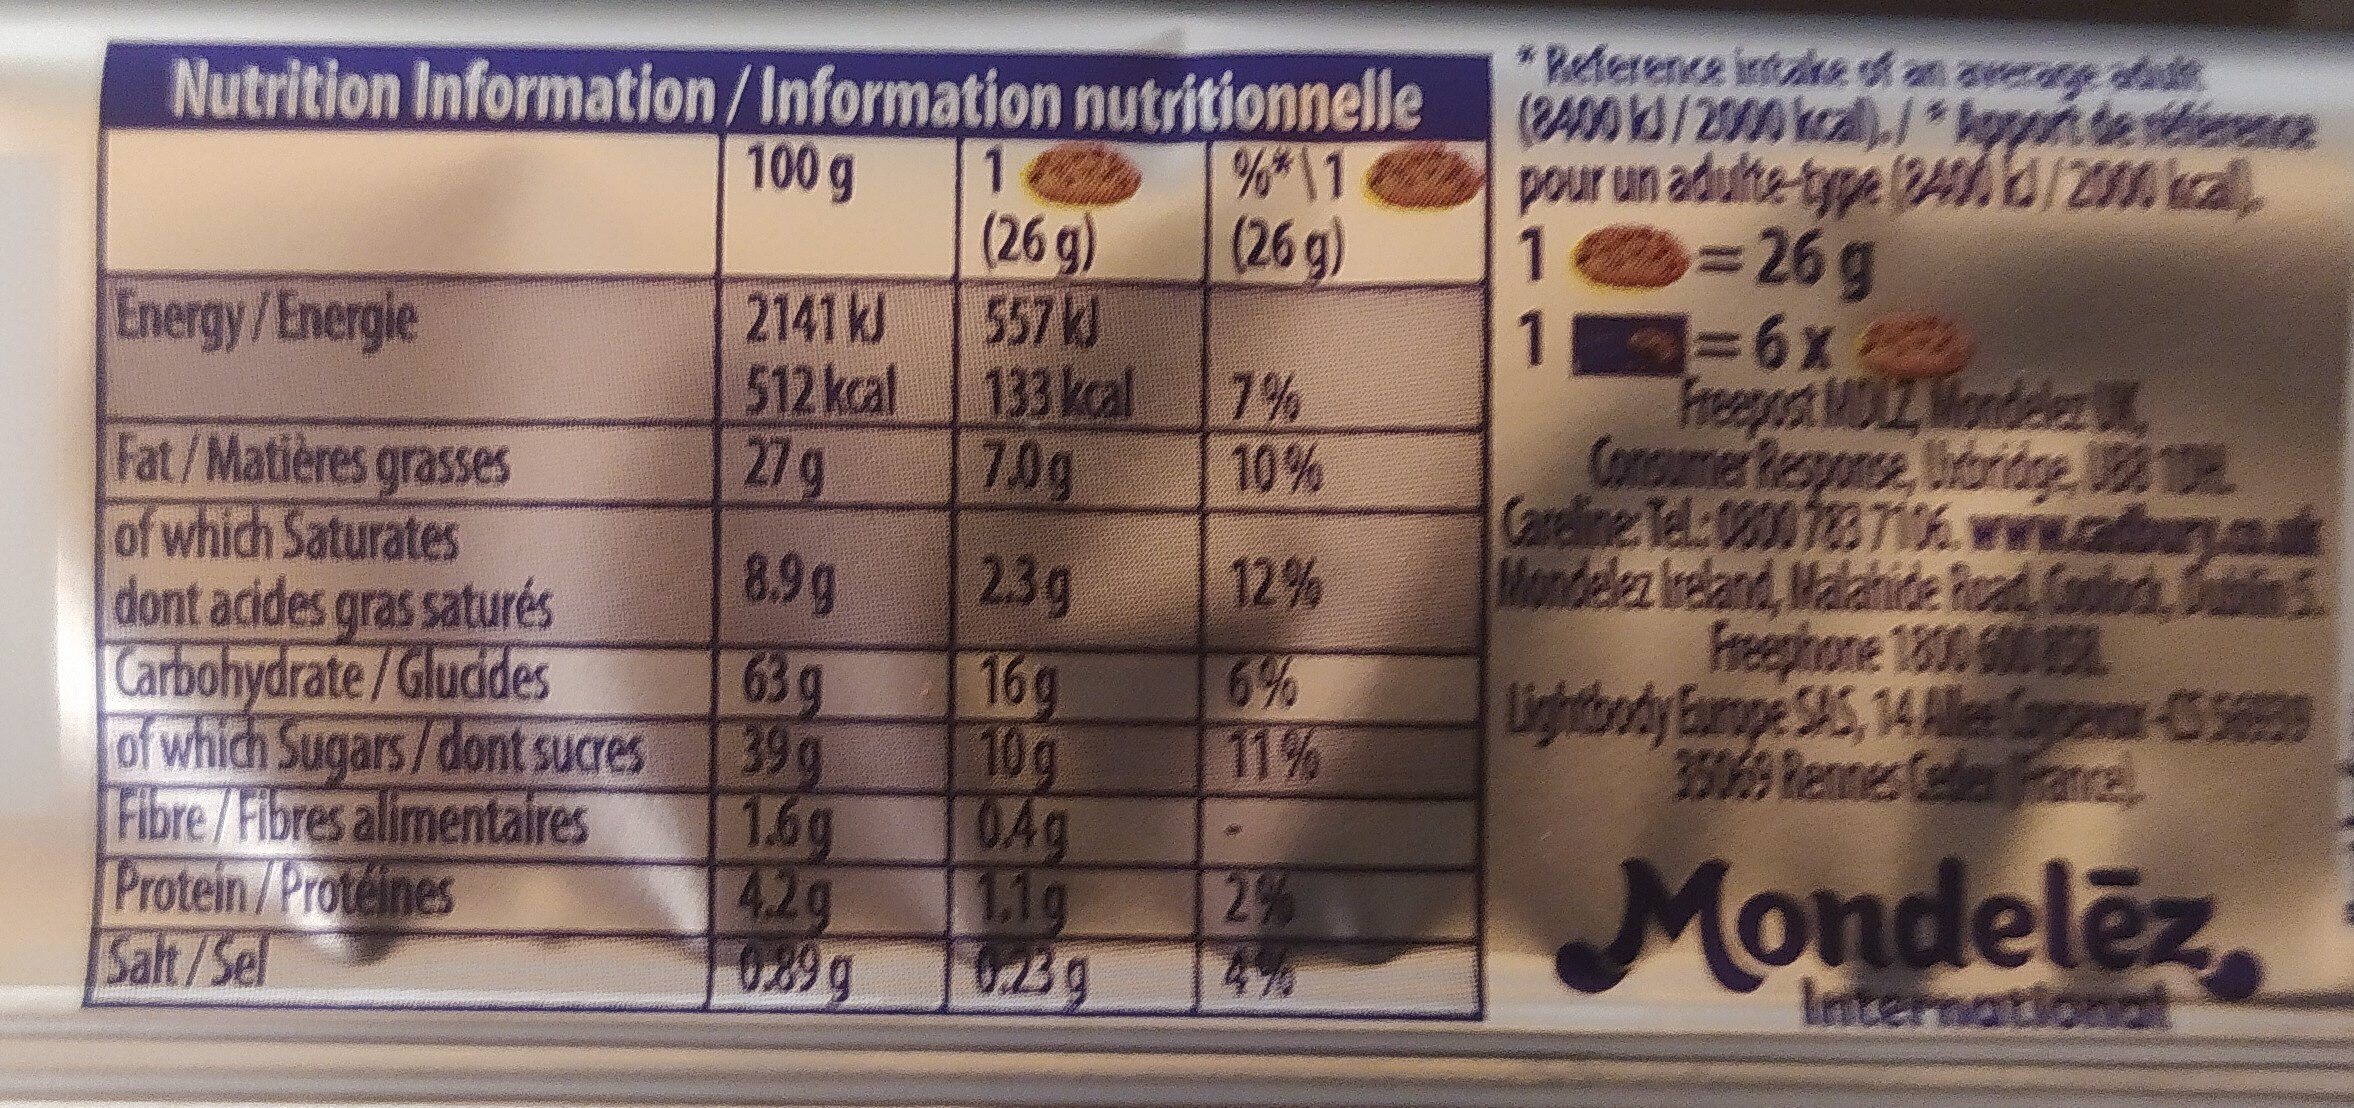 Crunchy Melts - Nutrition facts